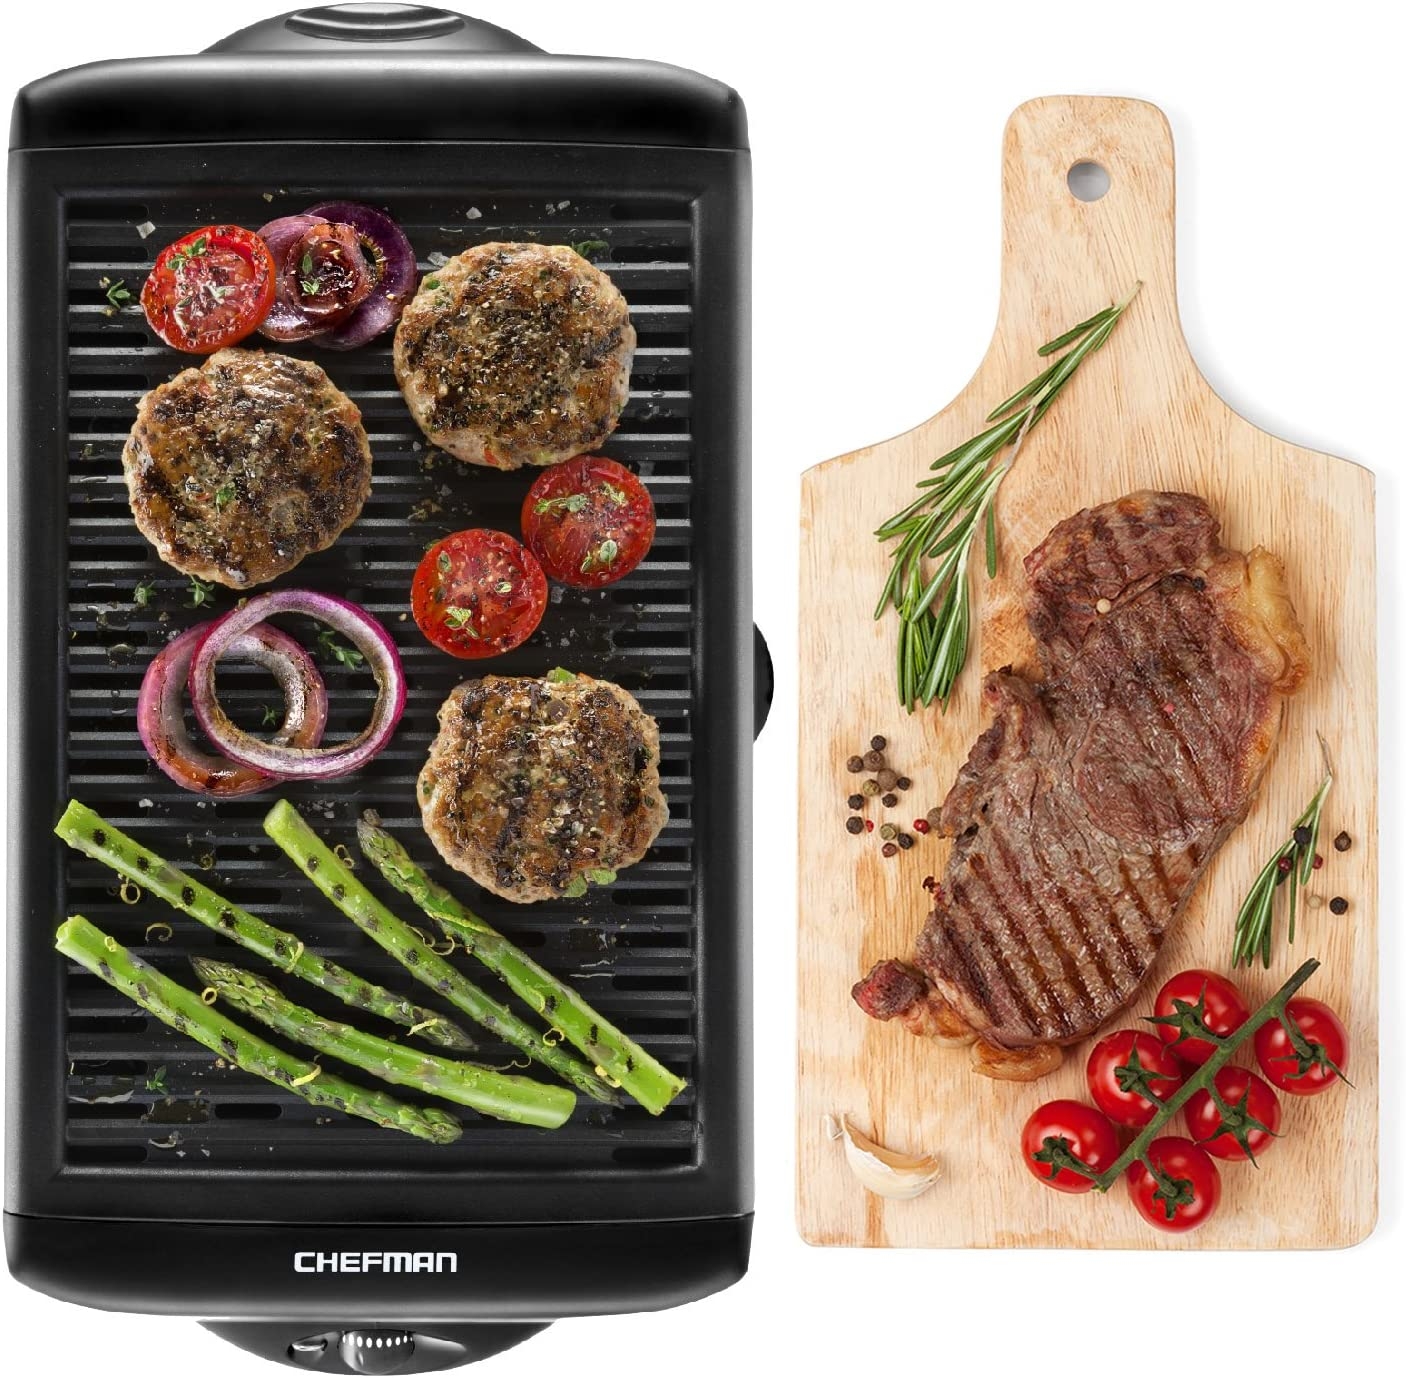 Chefman Electric Smokeless Indoor Grill w/Non-Stick Cooking Surface & Adjustable Temperature Knob from Warm to Sear for